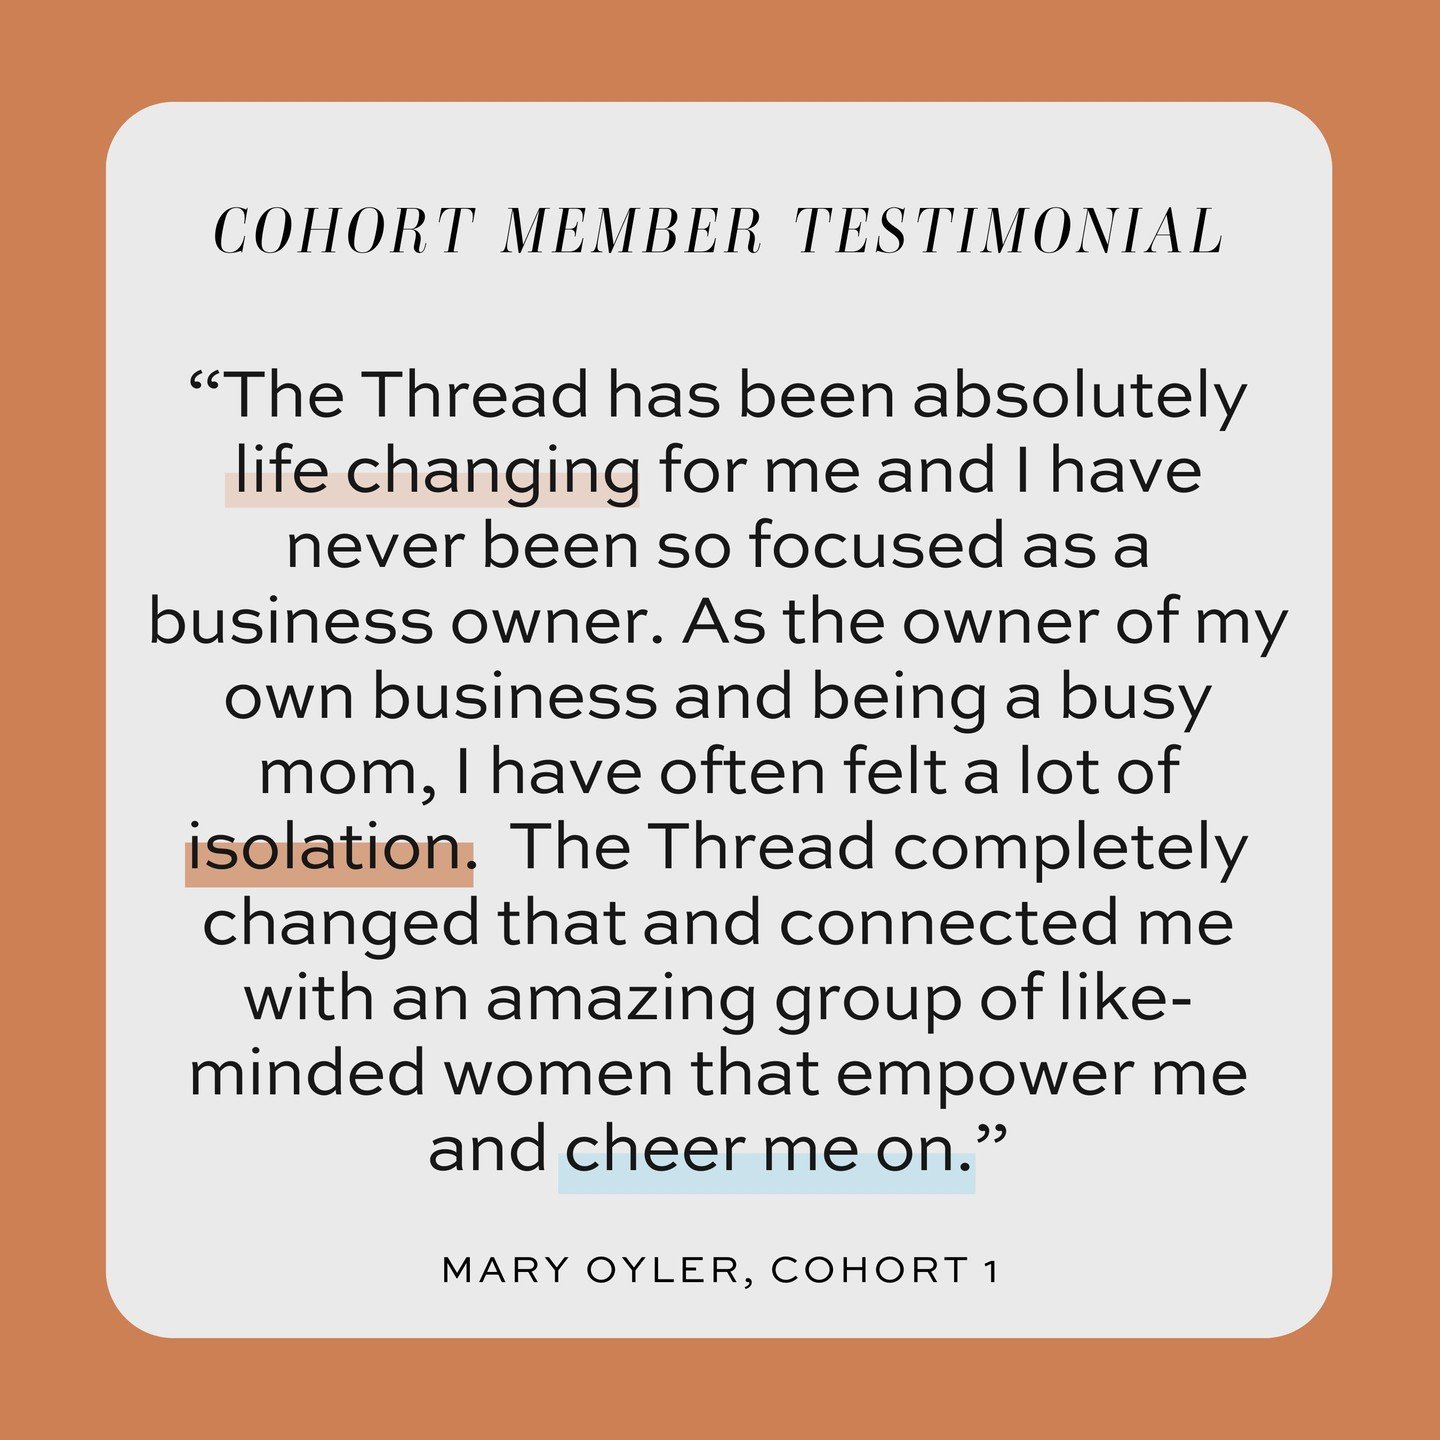 Isn't that just so beautiful? 

Mary continued by saying, &quot;They have helped me work through growing pains in my business, as well as how to maximize my skills to maintain the lifestyle and work/life balance I need. It has truly been amazing!&quo